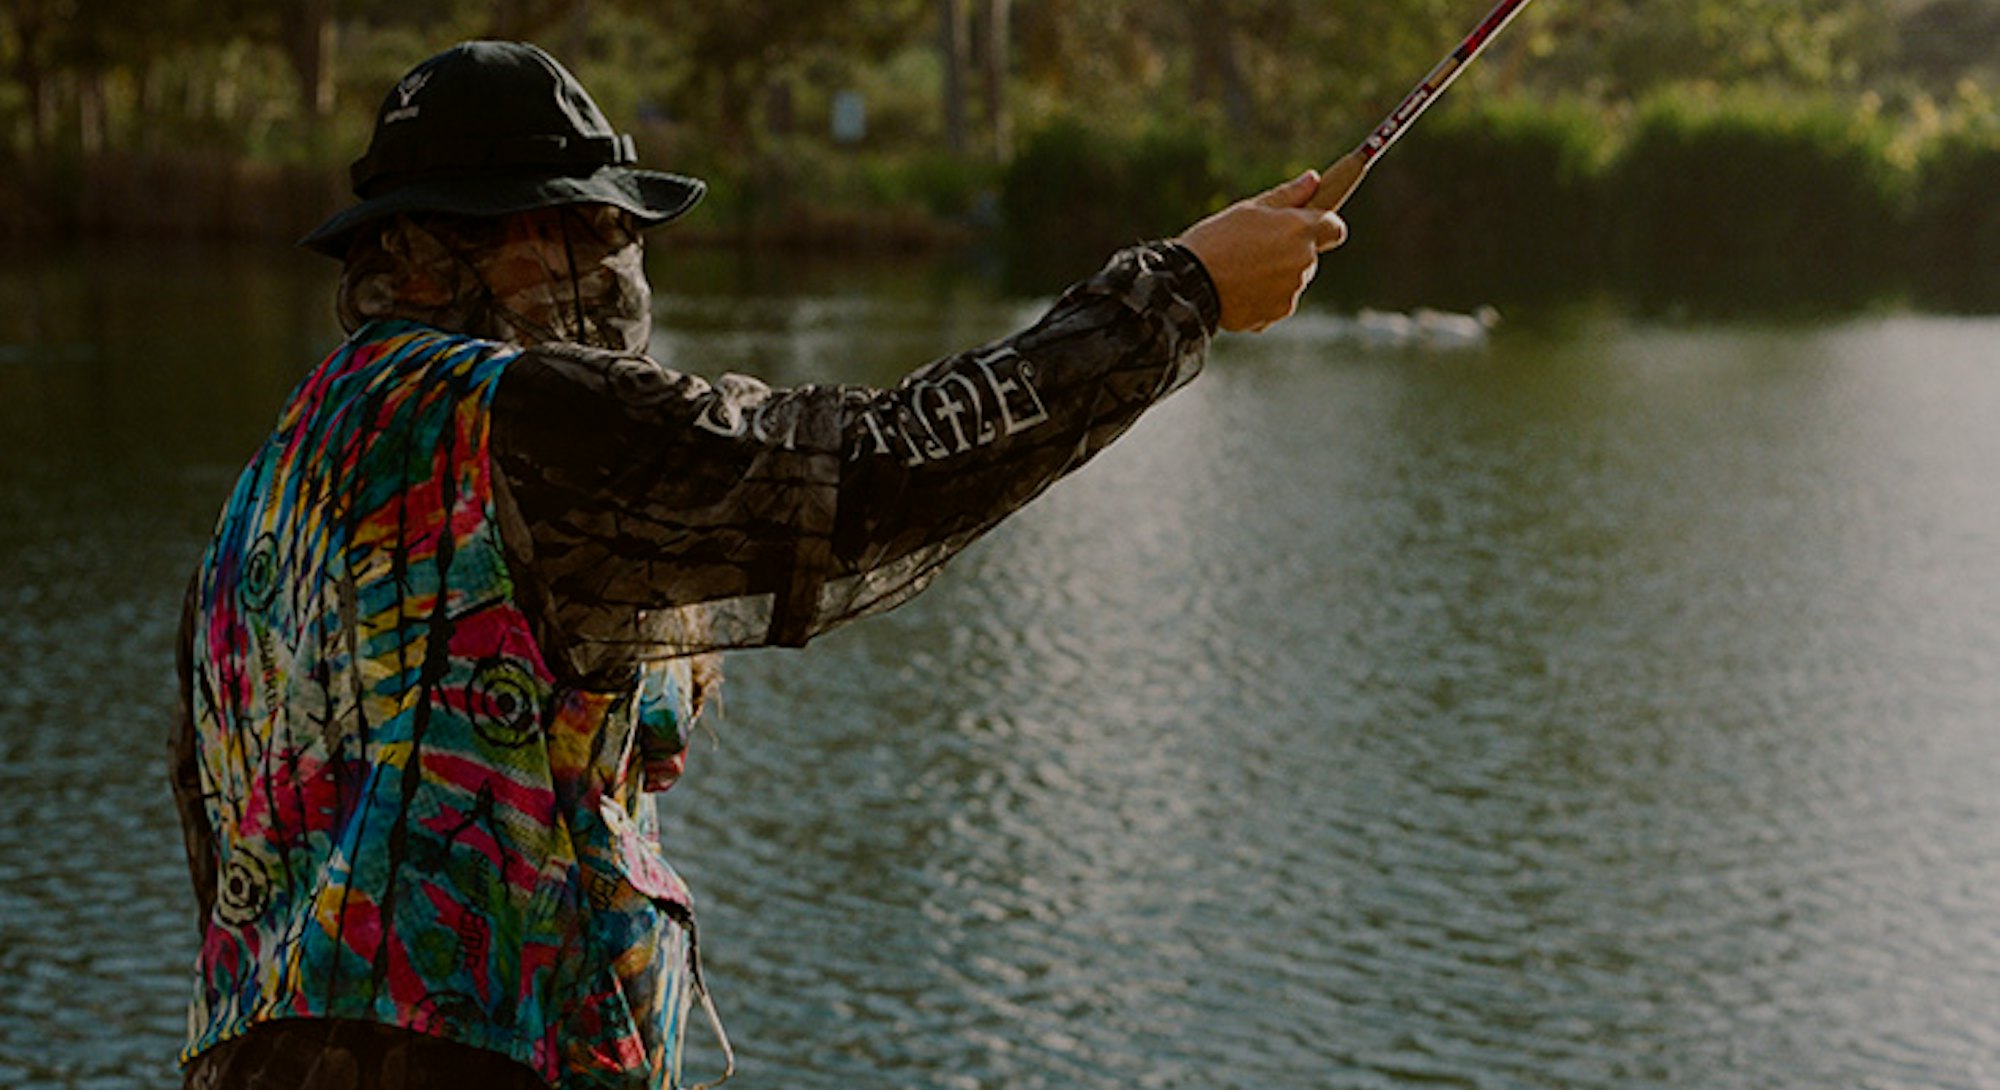 Incredibly disingenuous' and 'laughable': A tale of Supreme's fishing collab